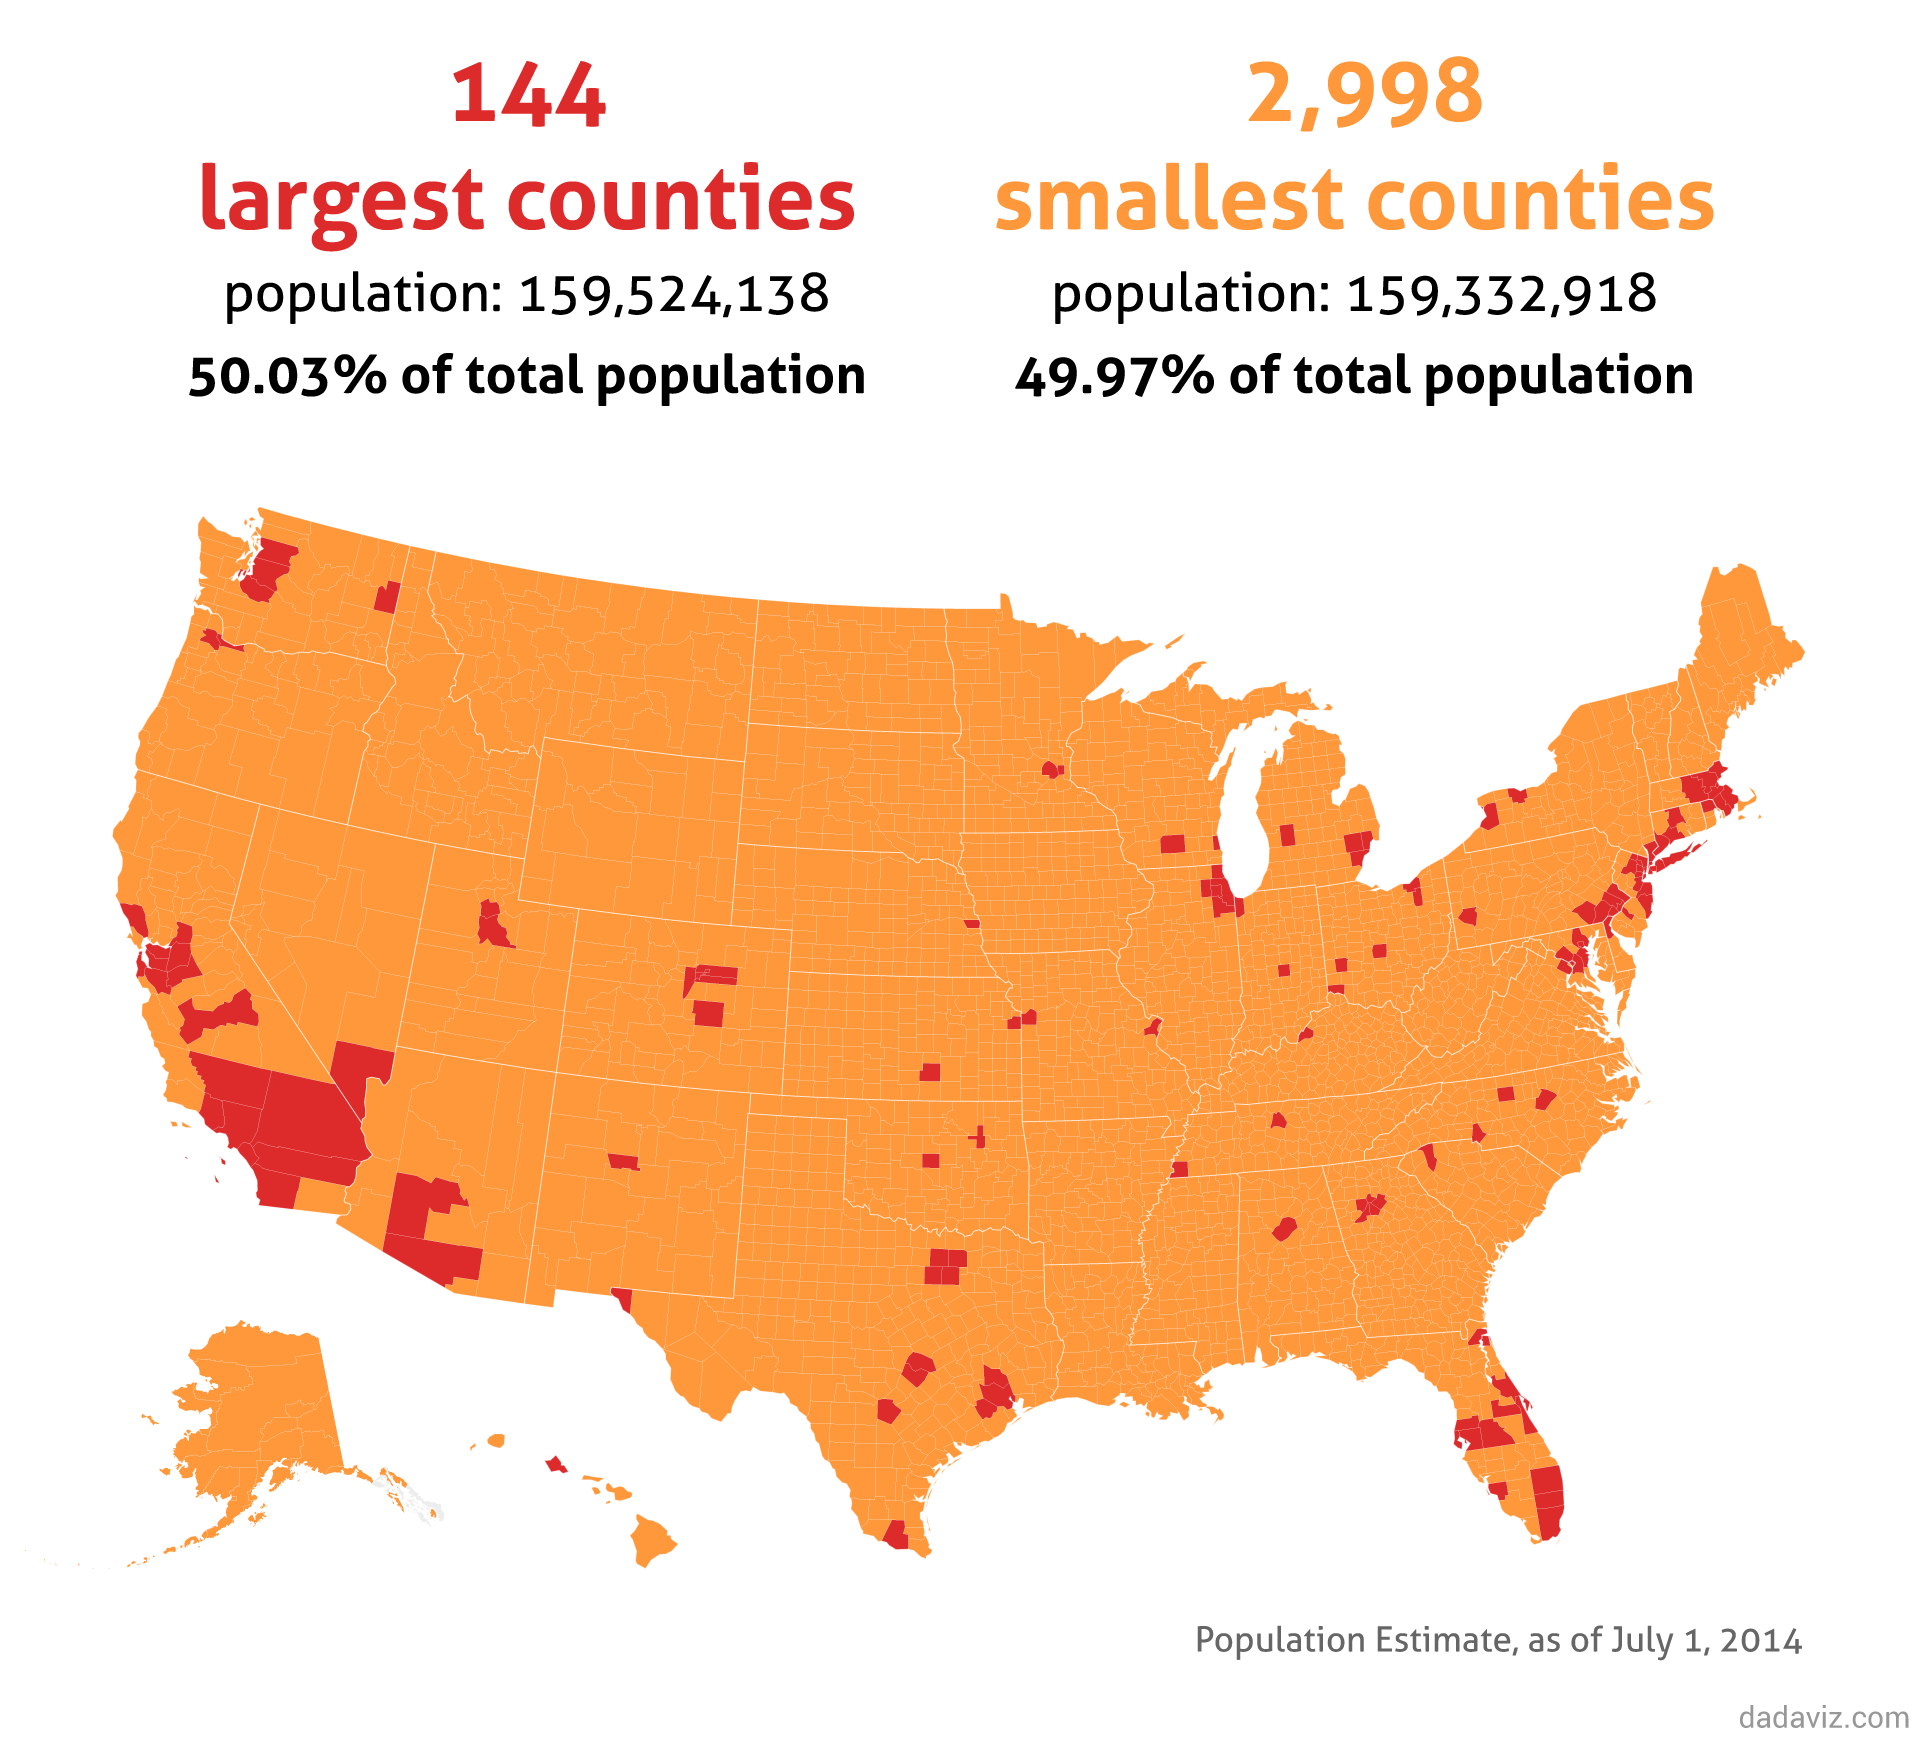 Maps The Extreme Variance in U.S. Population Distribution